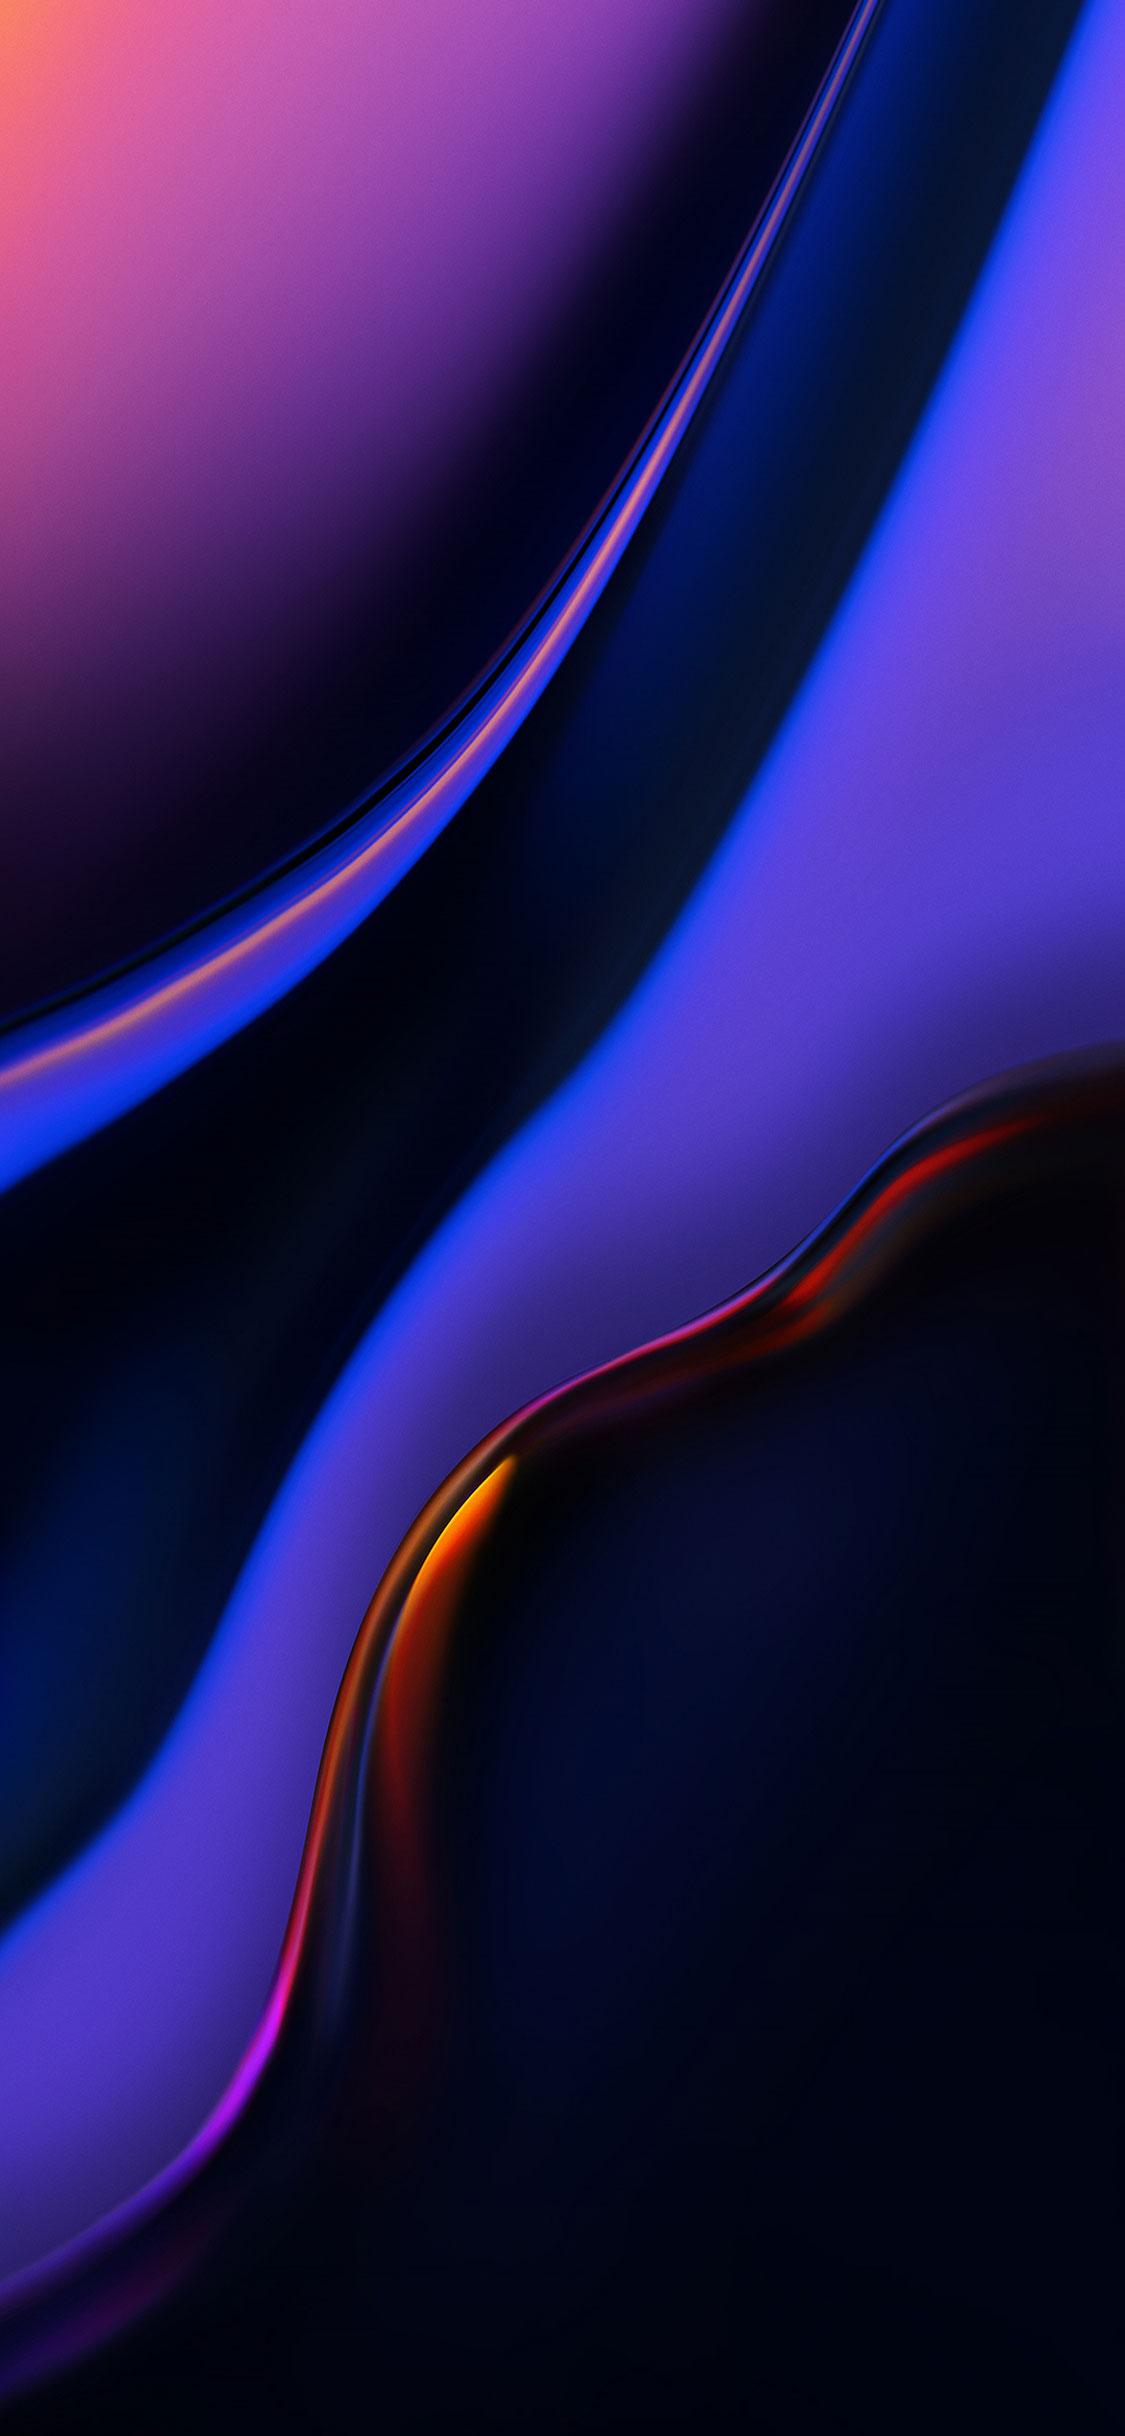 Latest Best iPhone X Wallpaper & Background For Everyone